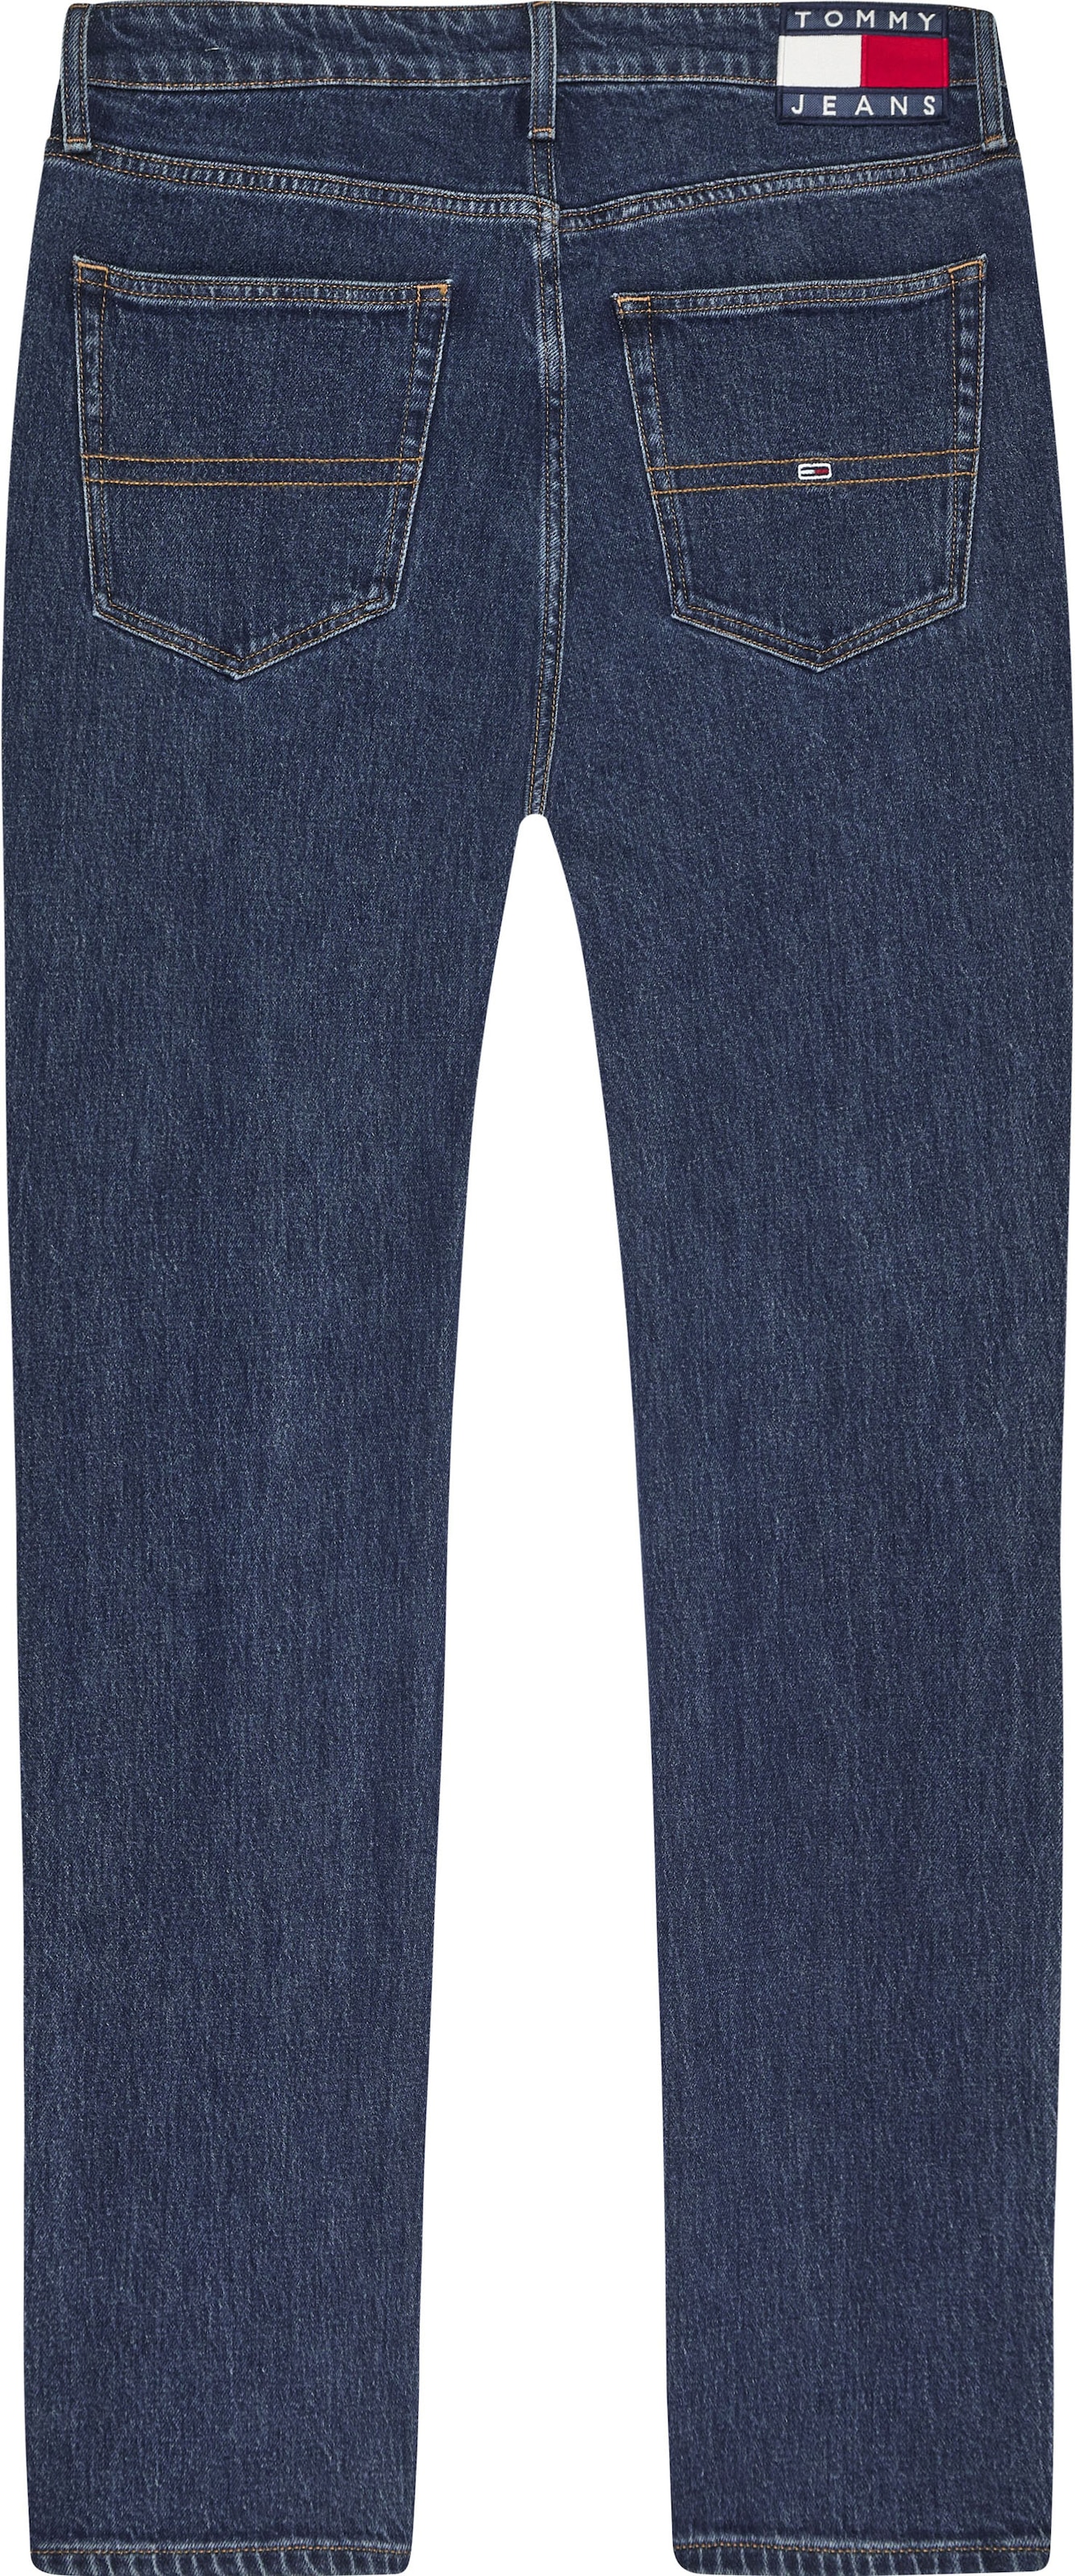 Jeans bei Tommy Tommy mit Straight-Jeans »RYAN Münzfach RGLR ♕ Jeans STRGHT«, am Stitching